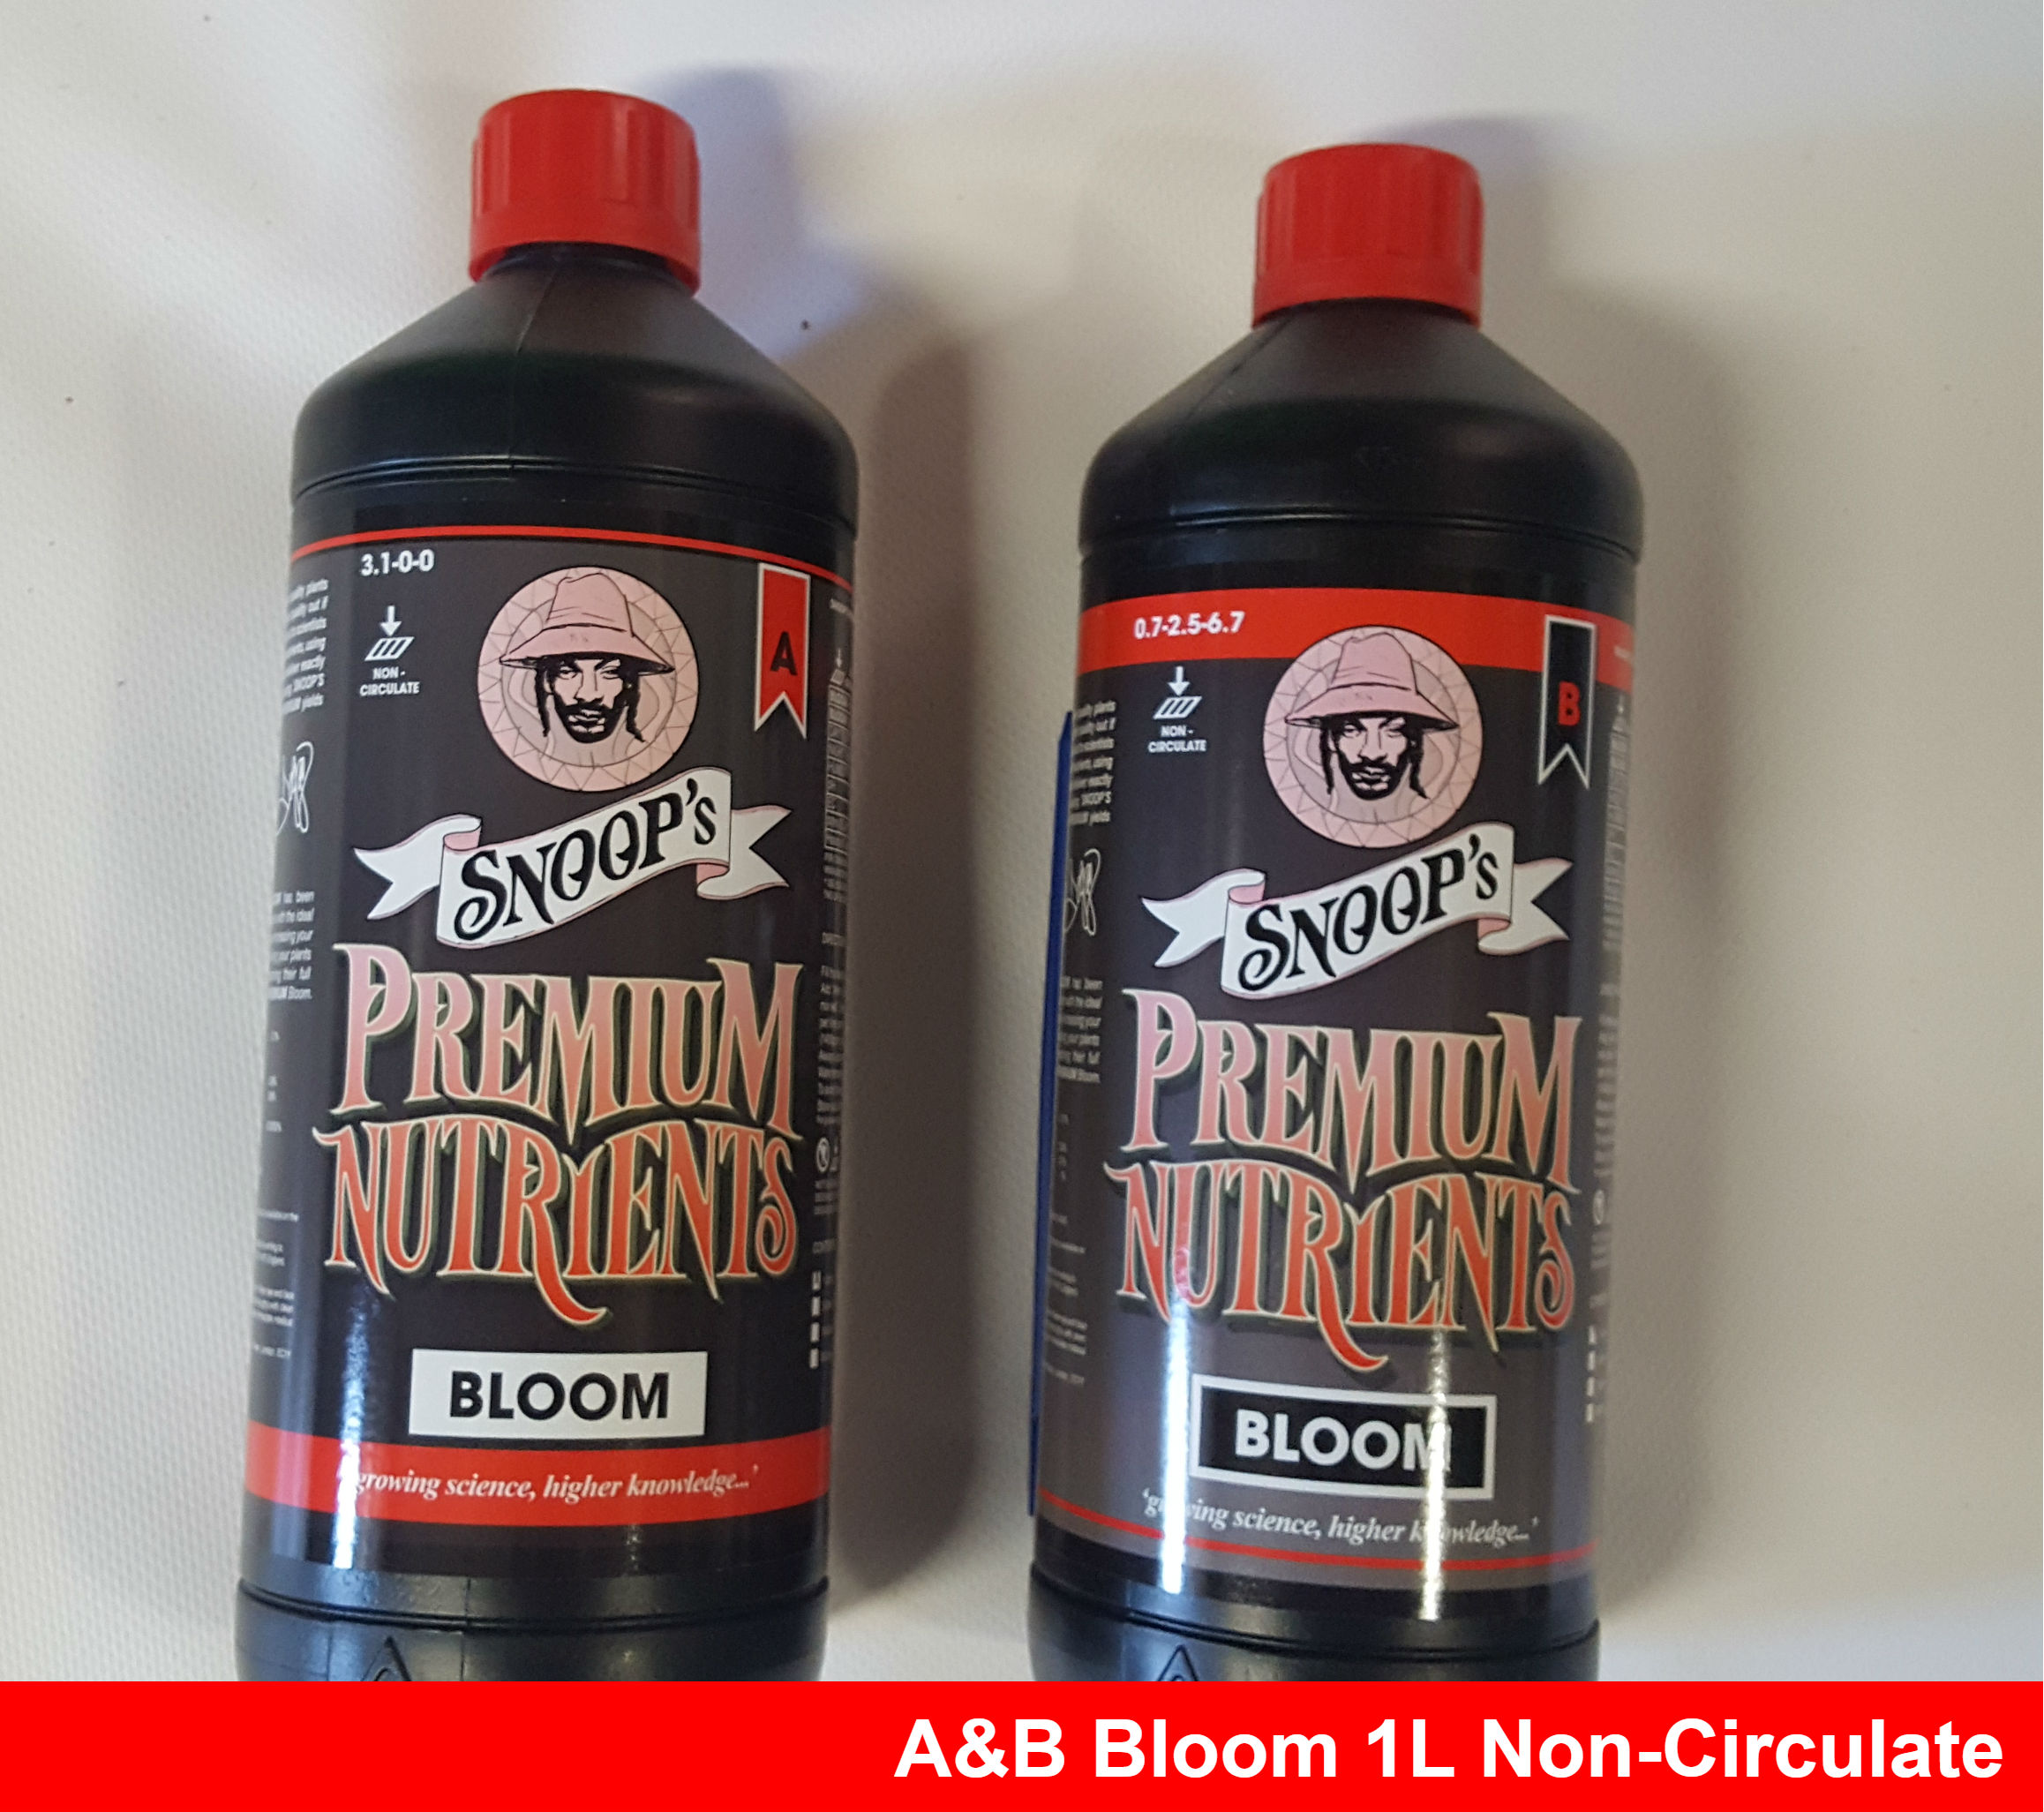 Snoop's A&B Bloom 1L Non-Circulate for Soil